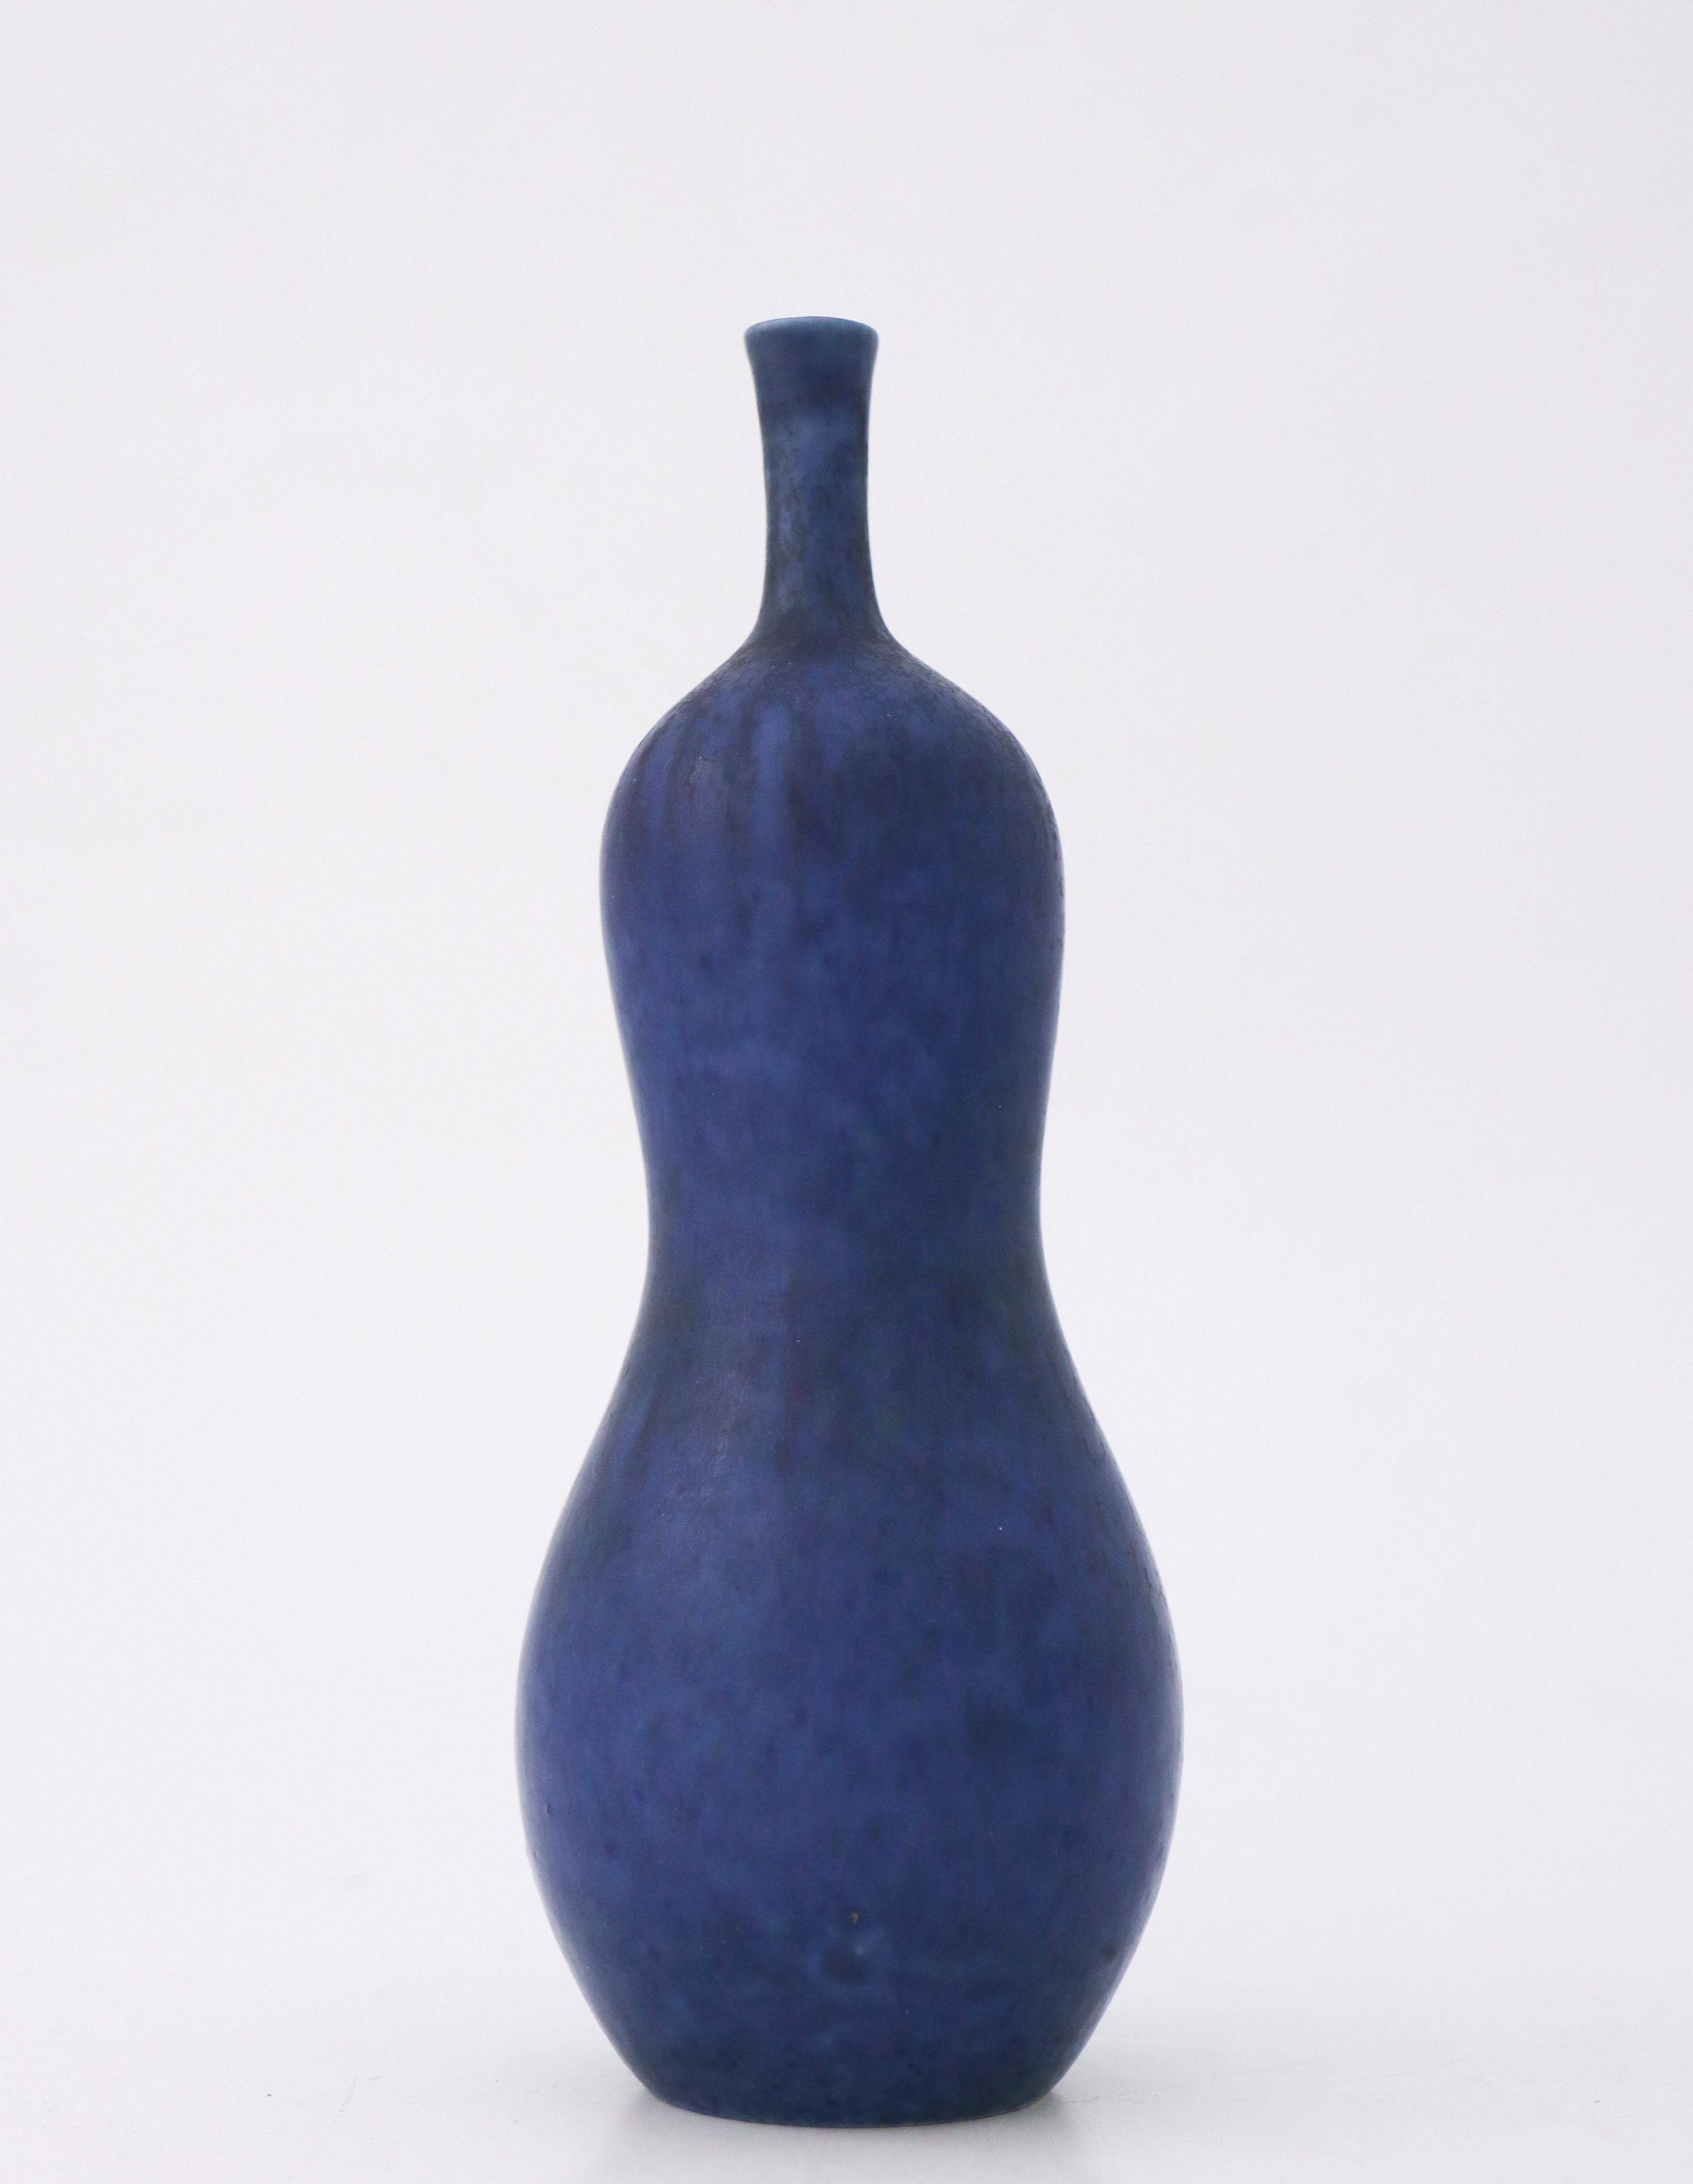 A lovely blue probably unique vase designed by Carl-Harry Stålhane at Rörstrand in the late 1940s the vase is 19.5 cm high. It has a minor white mark in the glaze except from that it is in excellent condition. 

Carl-Harry Stålhane is one of the top